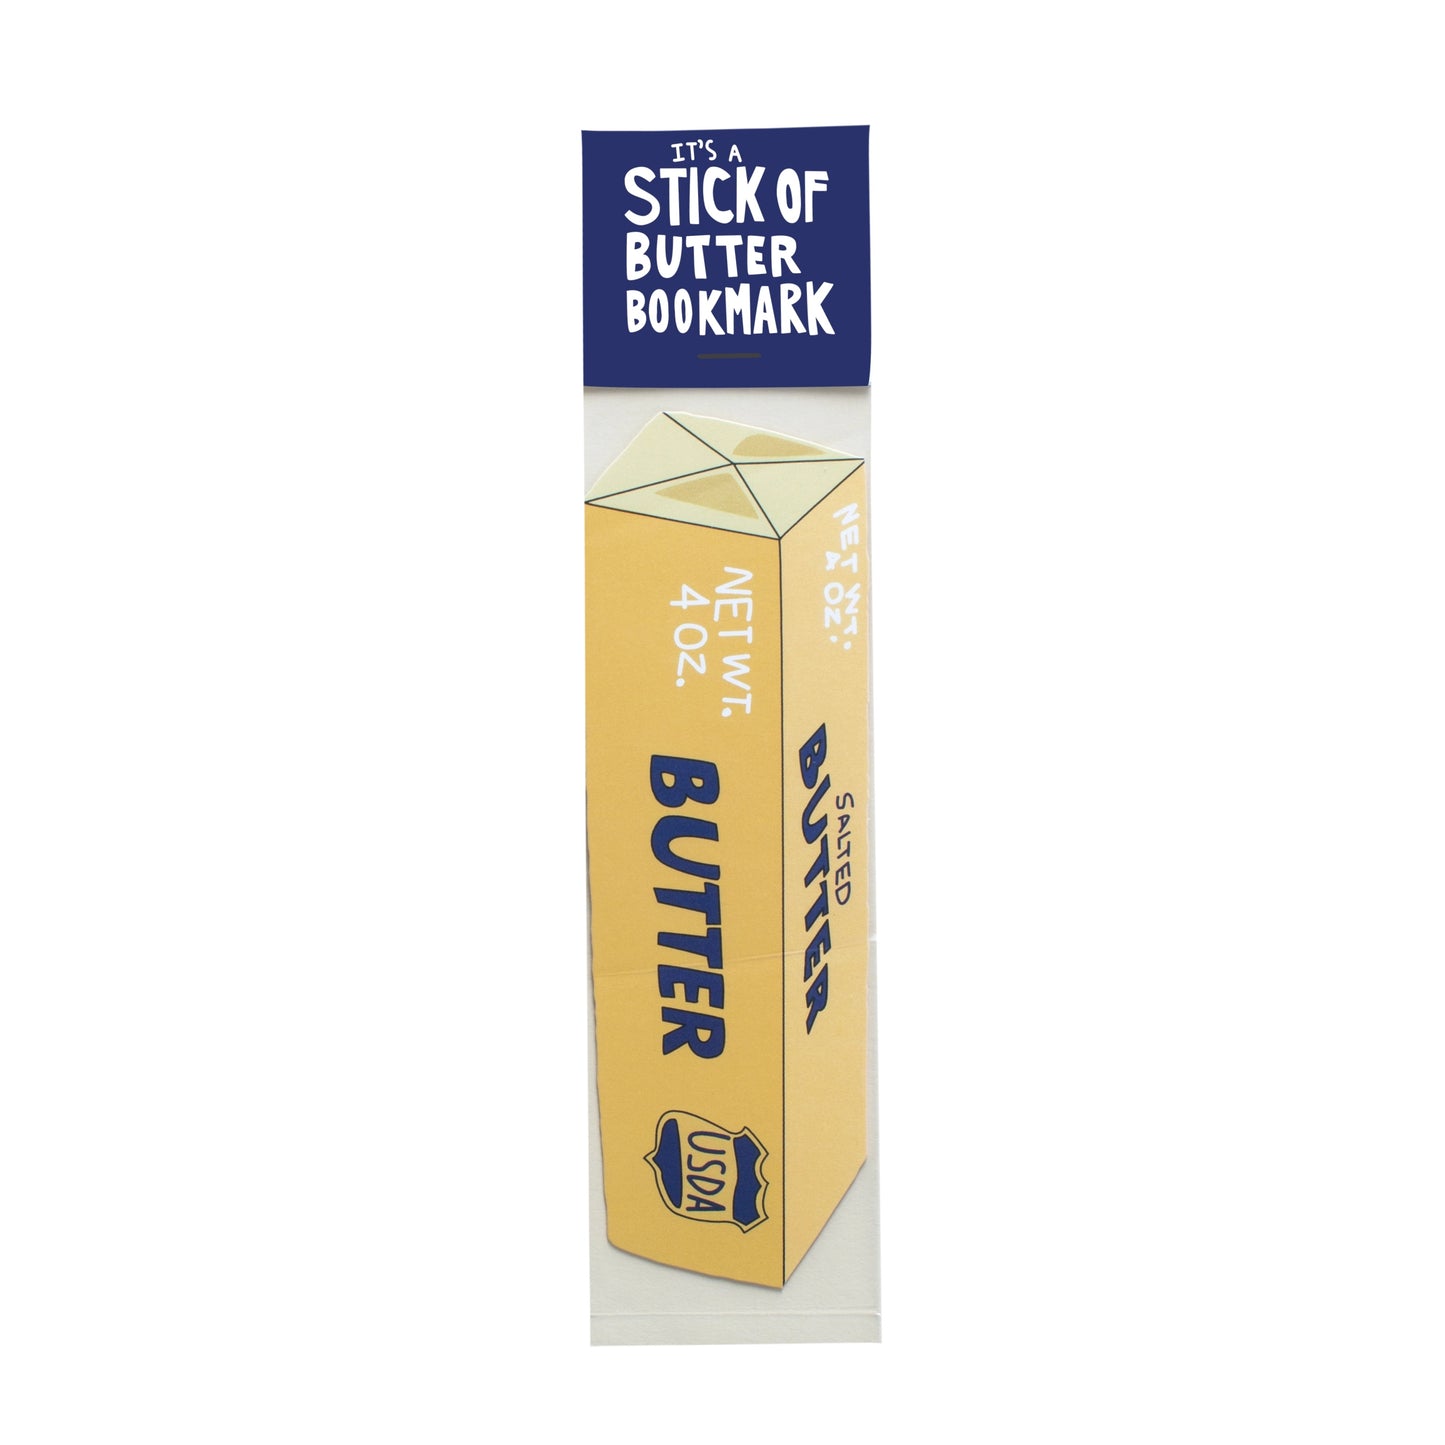 Stick of Butter Bookmark (it's die cut!) by Humdrum Paper